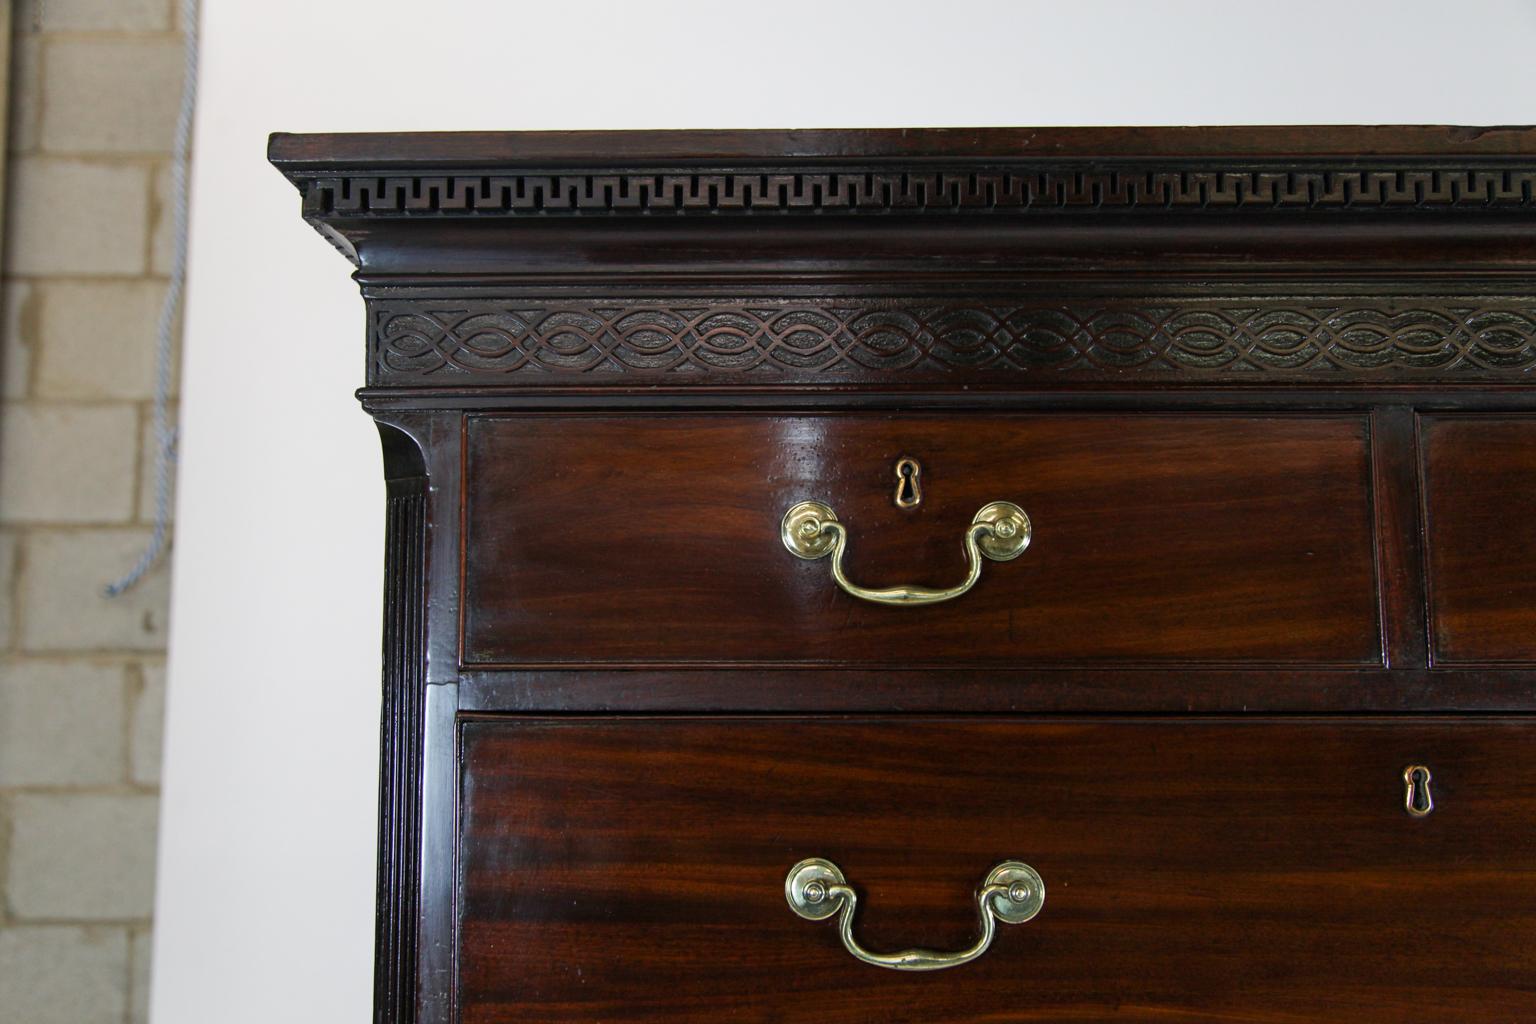 18th century English Chippendale mahogany chest on chest, upper section with “wall of Troy” dentil cornice above blind fretwork frieze, two over three drawer arrangement, the lower section with brushing slide over three graduated drawers, on slender